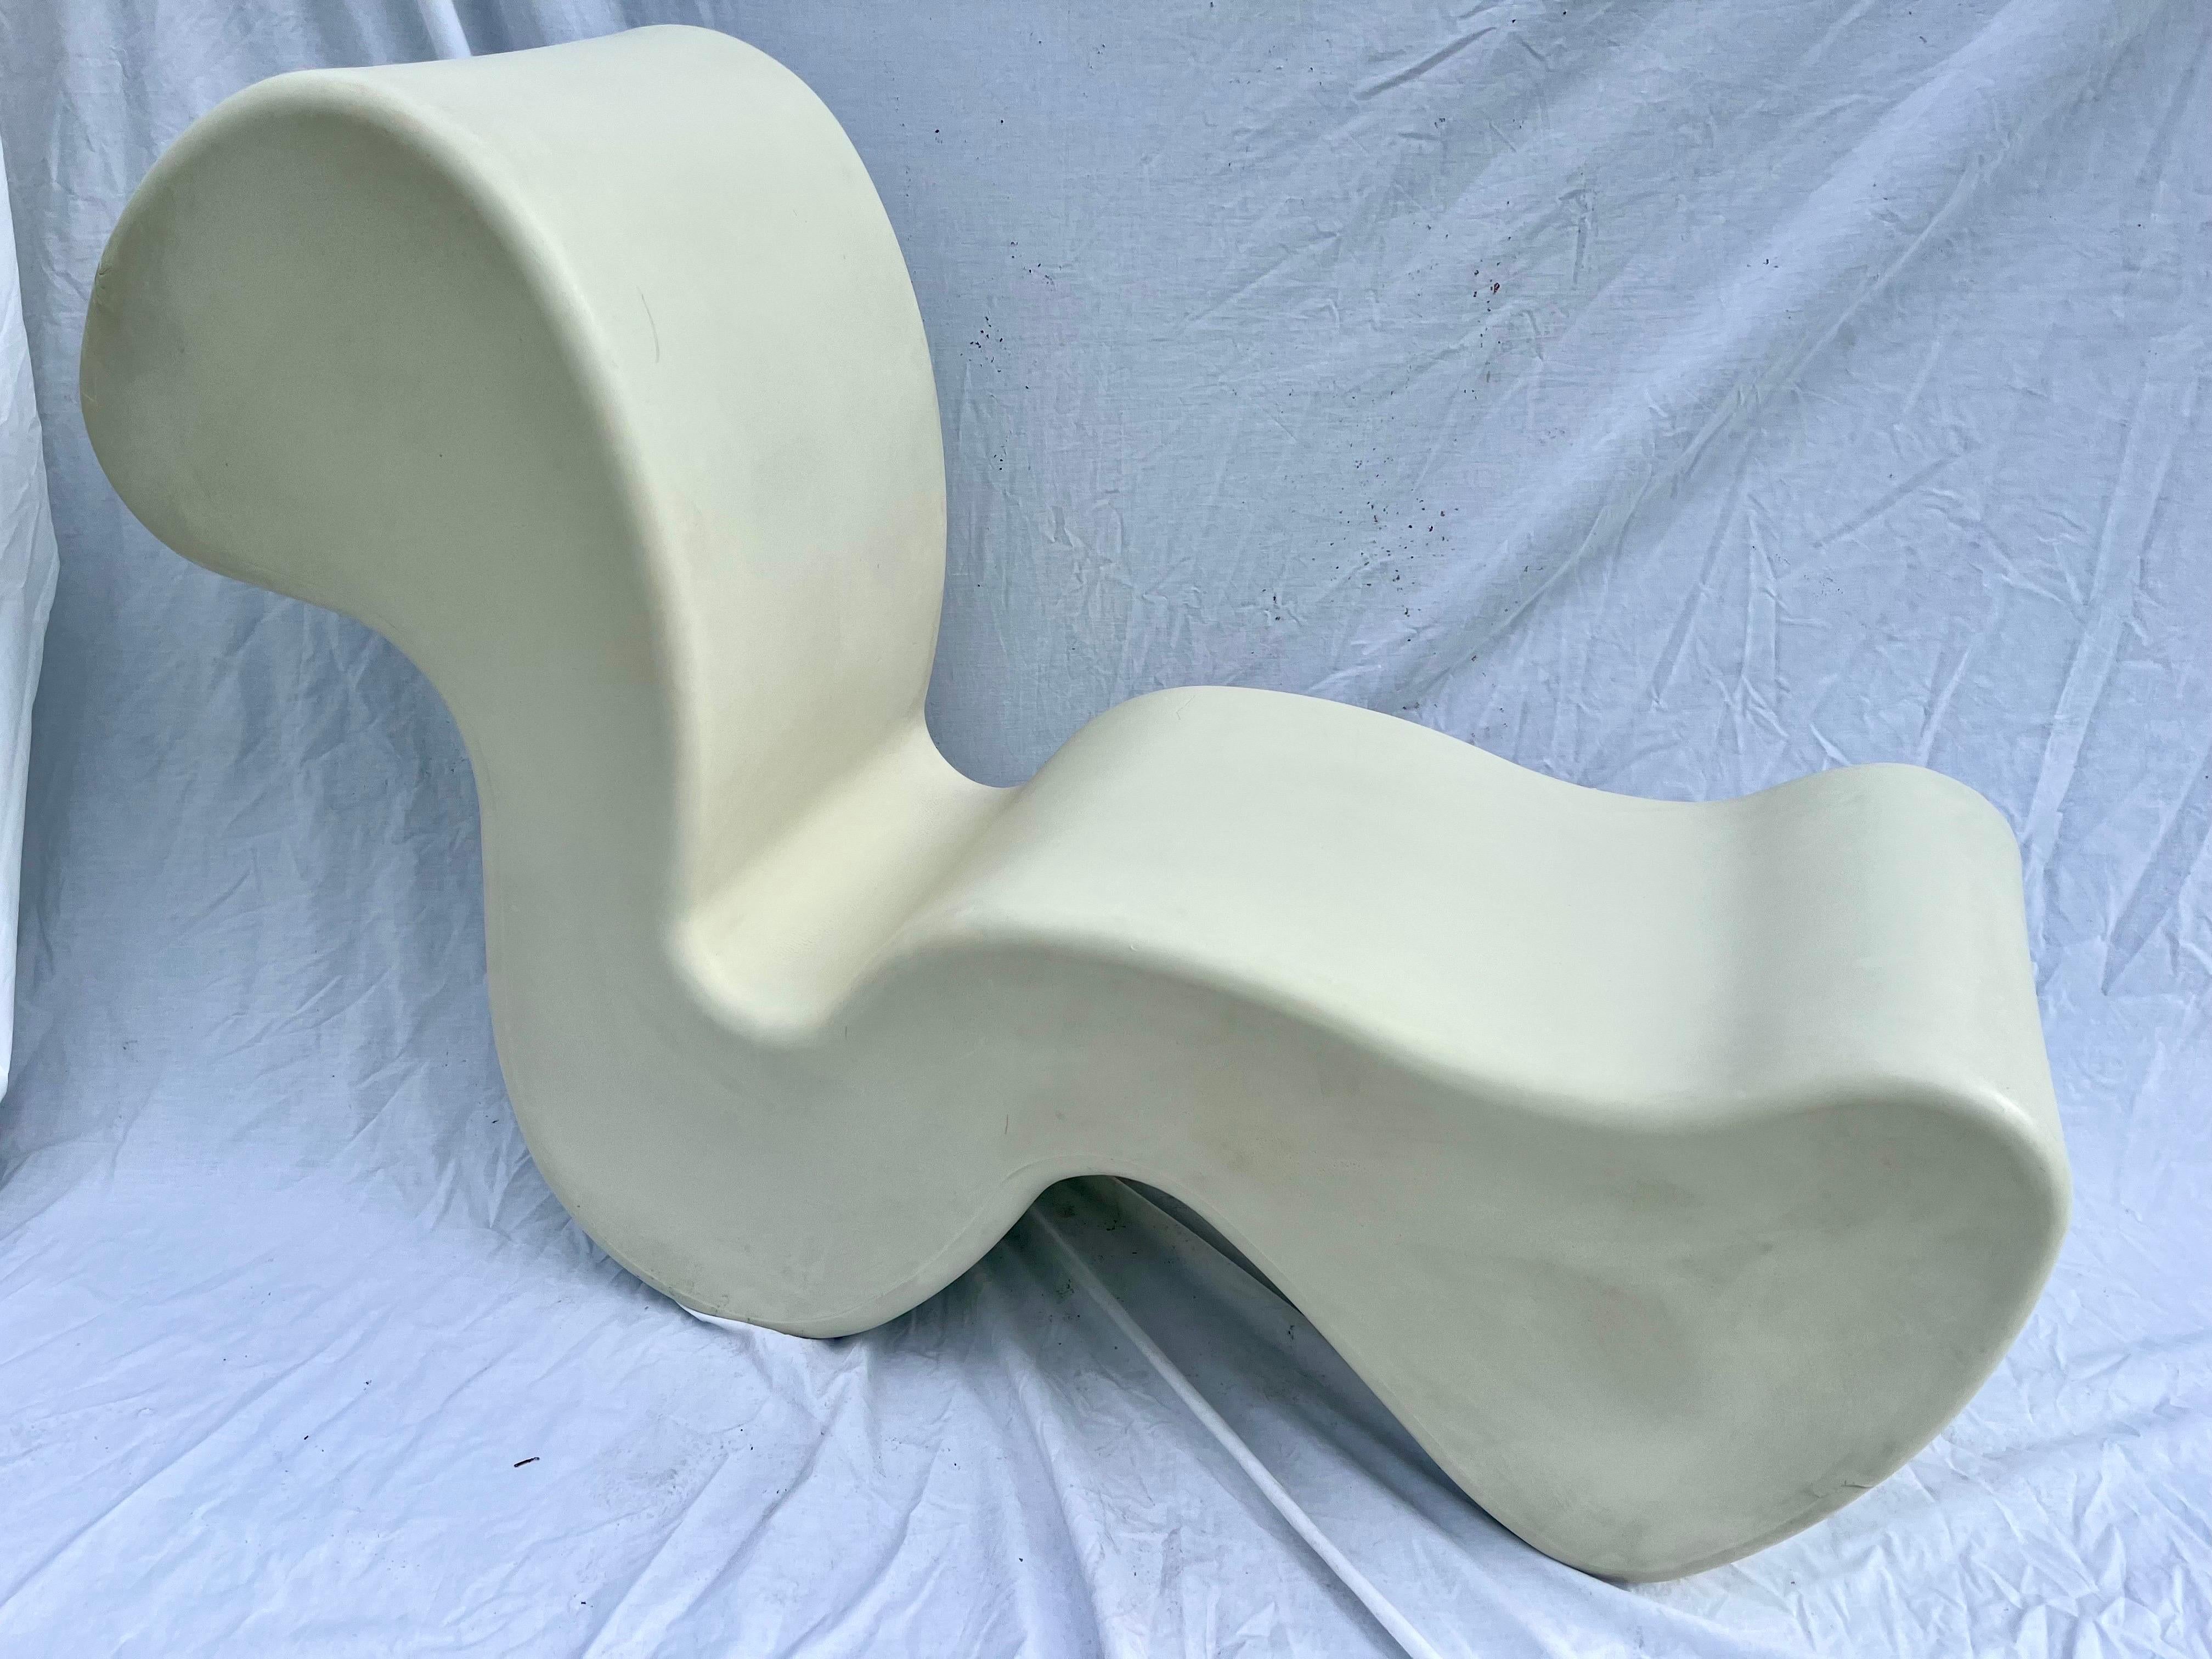 A vintage, circa 1998, Phantom chair (yes, in a ghostly white) by Verner Panton. From the Verner Panton Official site, 